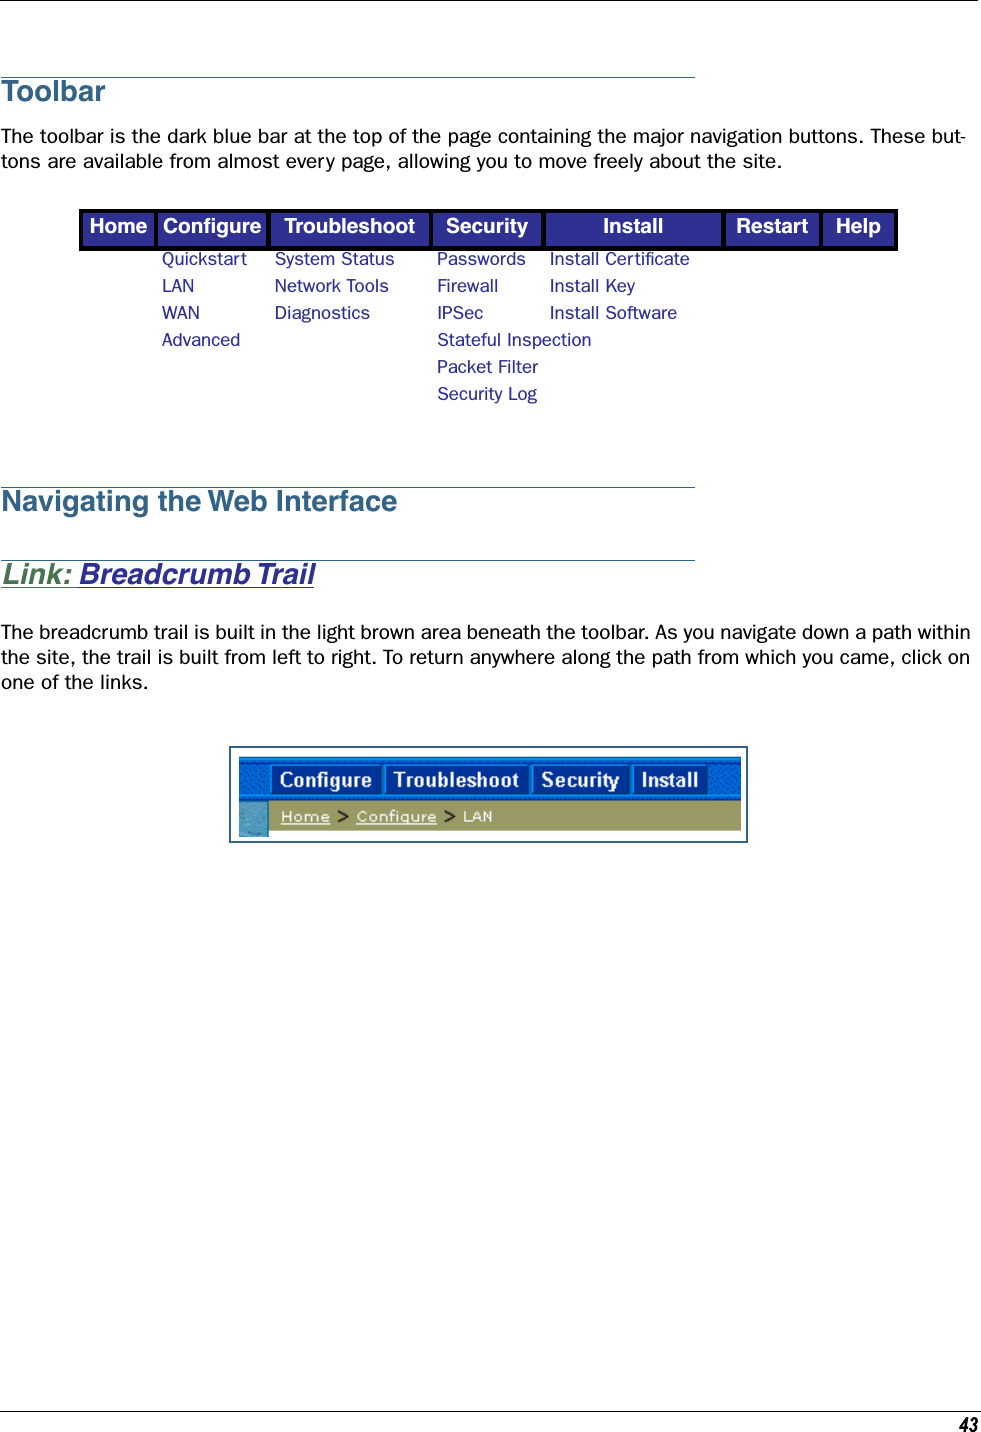 43ToolbarThe toolbar is the dark blue bar at the top of the page containing the major navigation buttons. These but-tons are available from almost every page, allowing you to move freely about the site. Navigating the Web InterfaceLink: Breadcrumb TrailThe breadcrumb trail is built in the light brown area beneath the toolbar. As you navigate down a path within the site, the trail is built from left to right. To return anywhere along the path from which you came, click on one of the links.Home Conﬁgure Troubleshoot Security Install Restart HelpQuickstart System Status Passwords Install CertiﬁcateLAN Network Tools Firewall Install KeyWAN Diagnostics IPSec Install SoftwareAdvanced Stateful InspectionPacket FilterSecurity Log